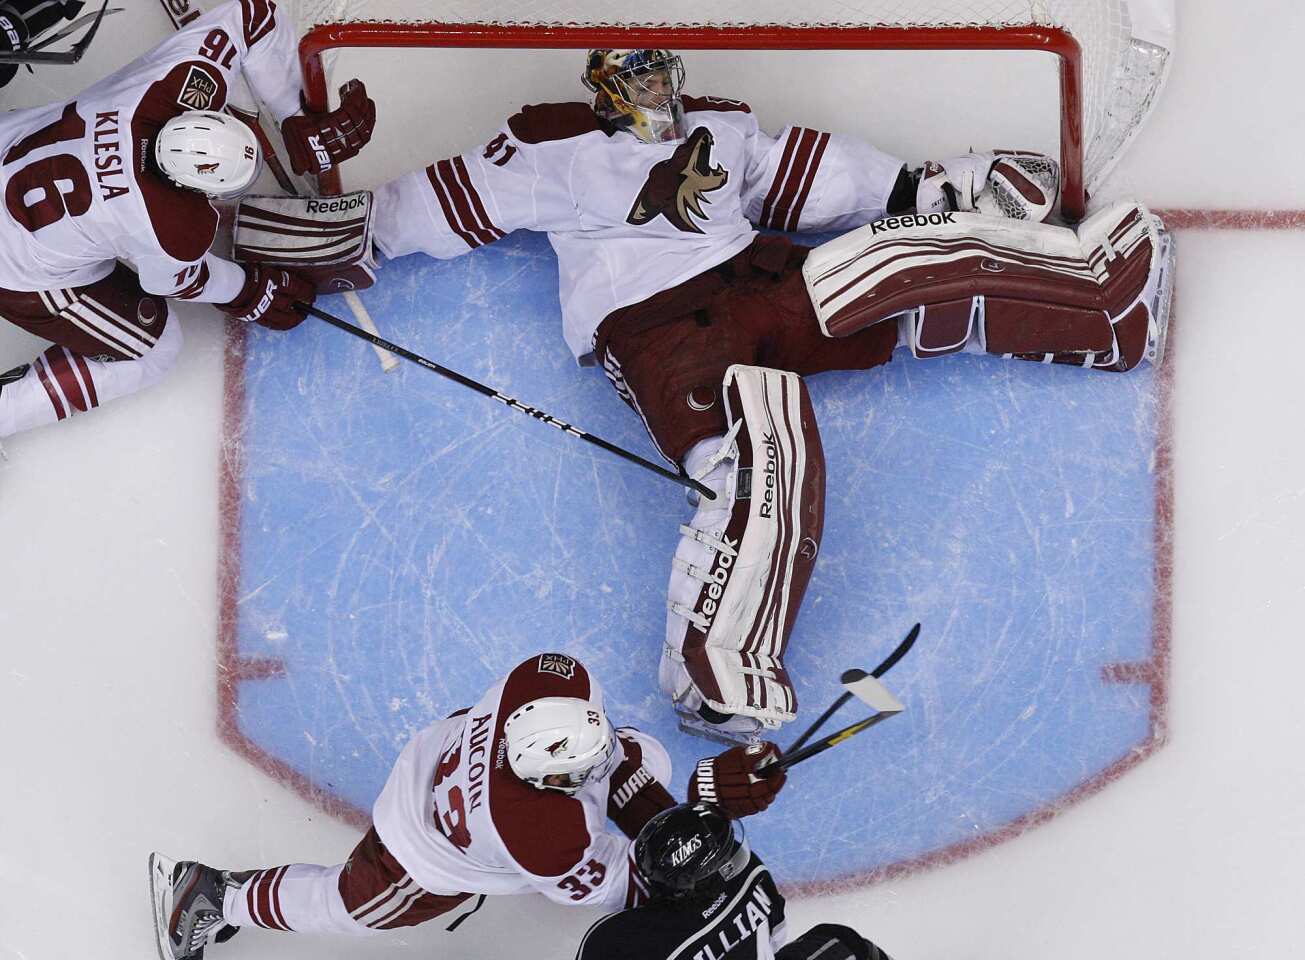 Coyotes goalie Mike Smith spreads out to stop a Kings shot in the second period of Game 4 on Sunday afternoon at Staples Center. Smith turned away 36 shots for a 2-0 victory, his third shutout of the postseason.